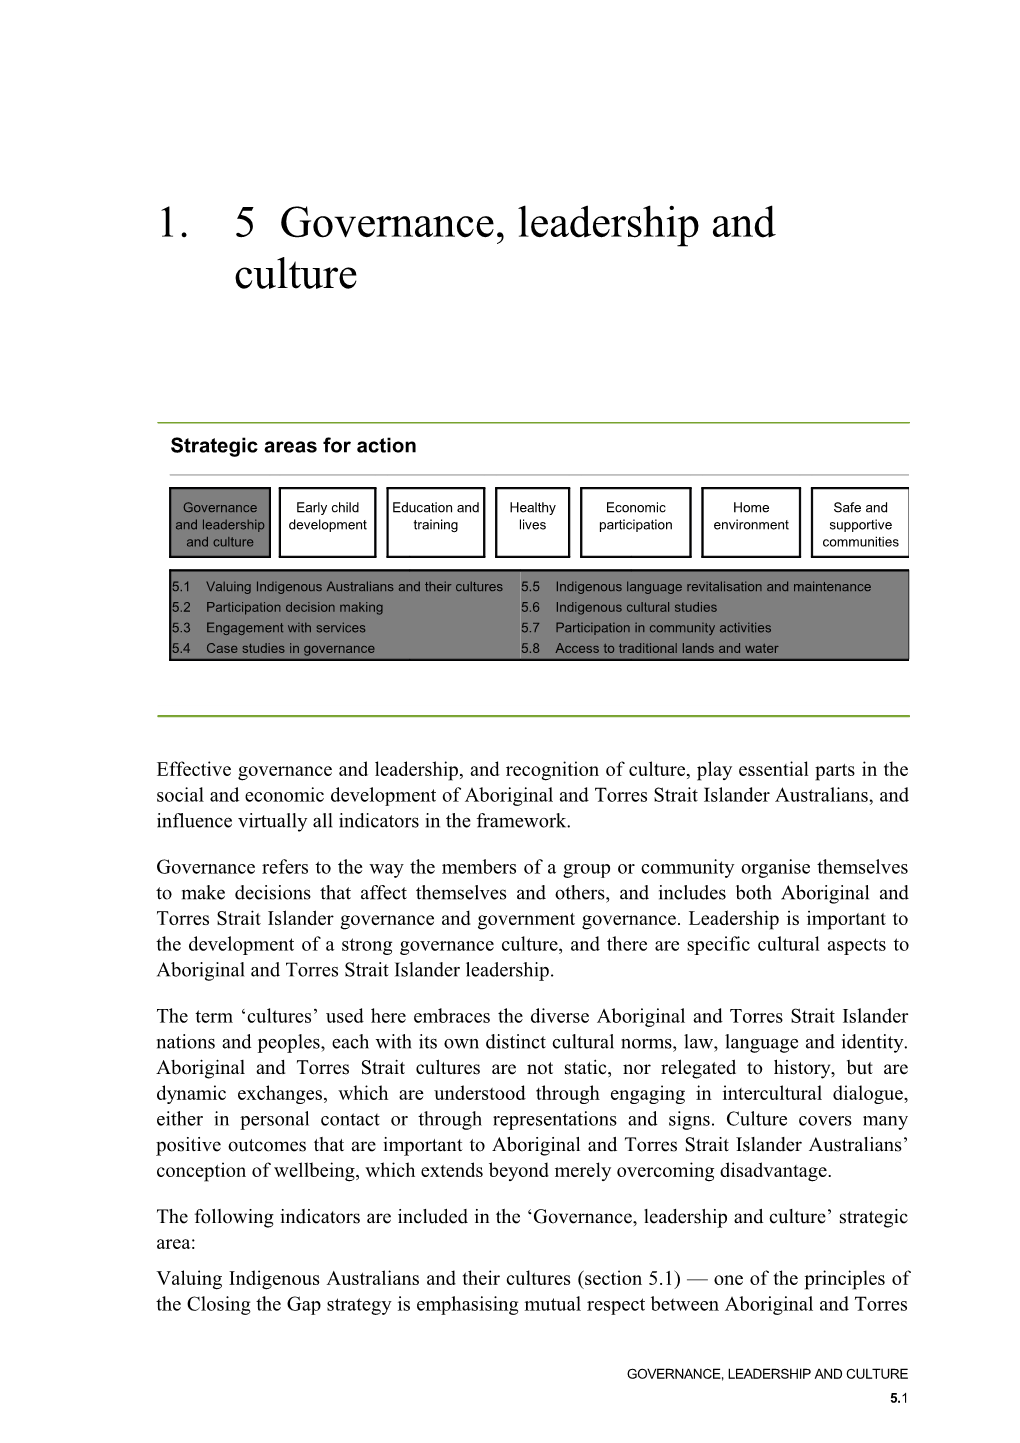 Chapter 5 Governance, Leadership and Culture - Overcoming Indigenous Disadvantage - Key